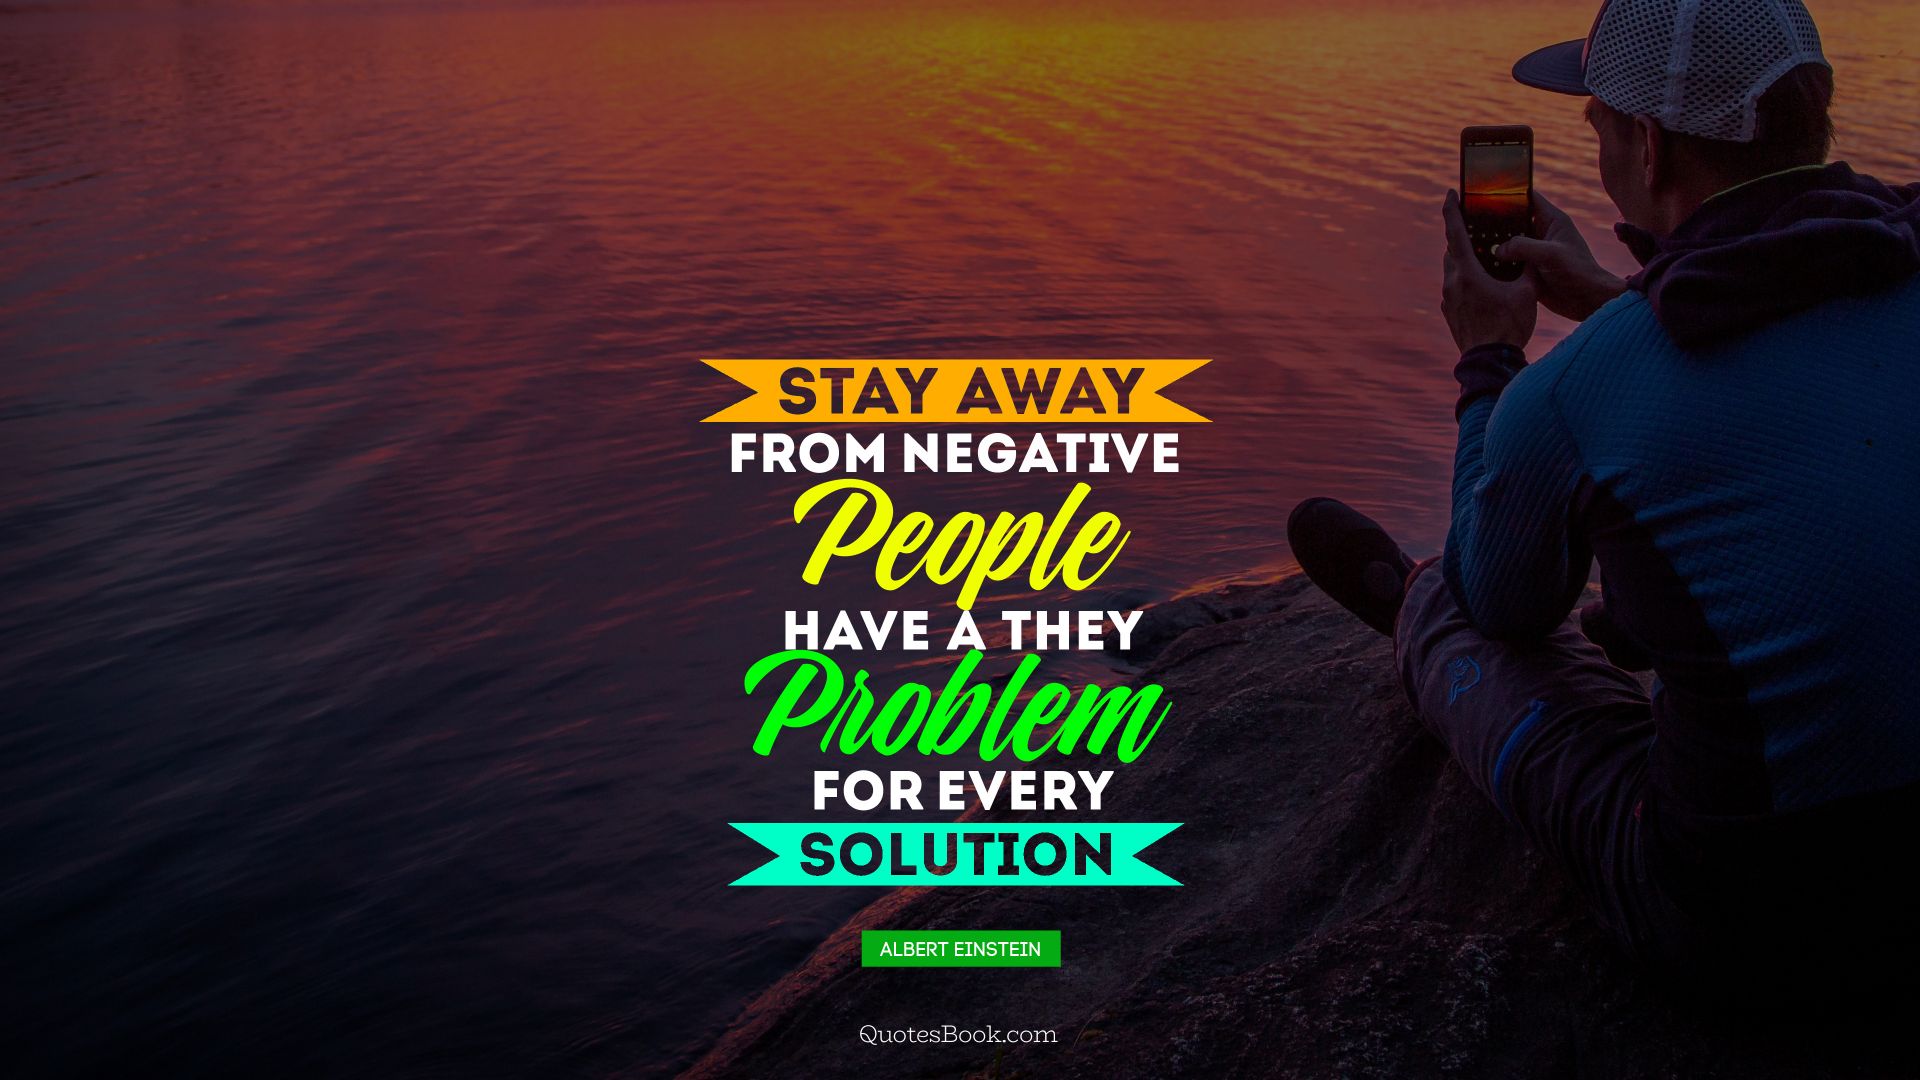 Stay away from negative people they have a problem for every solution. - Quote by Albert Einstein